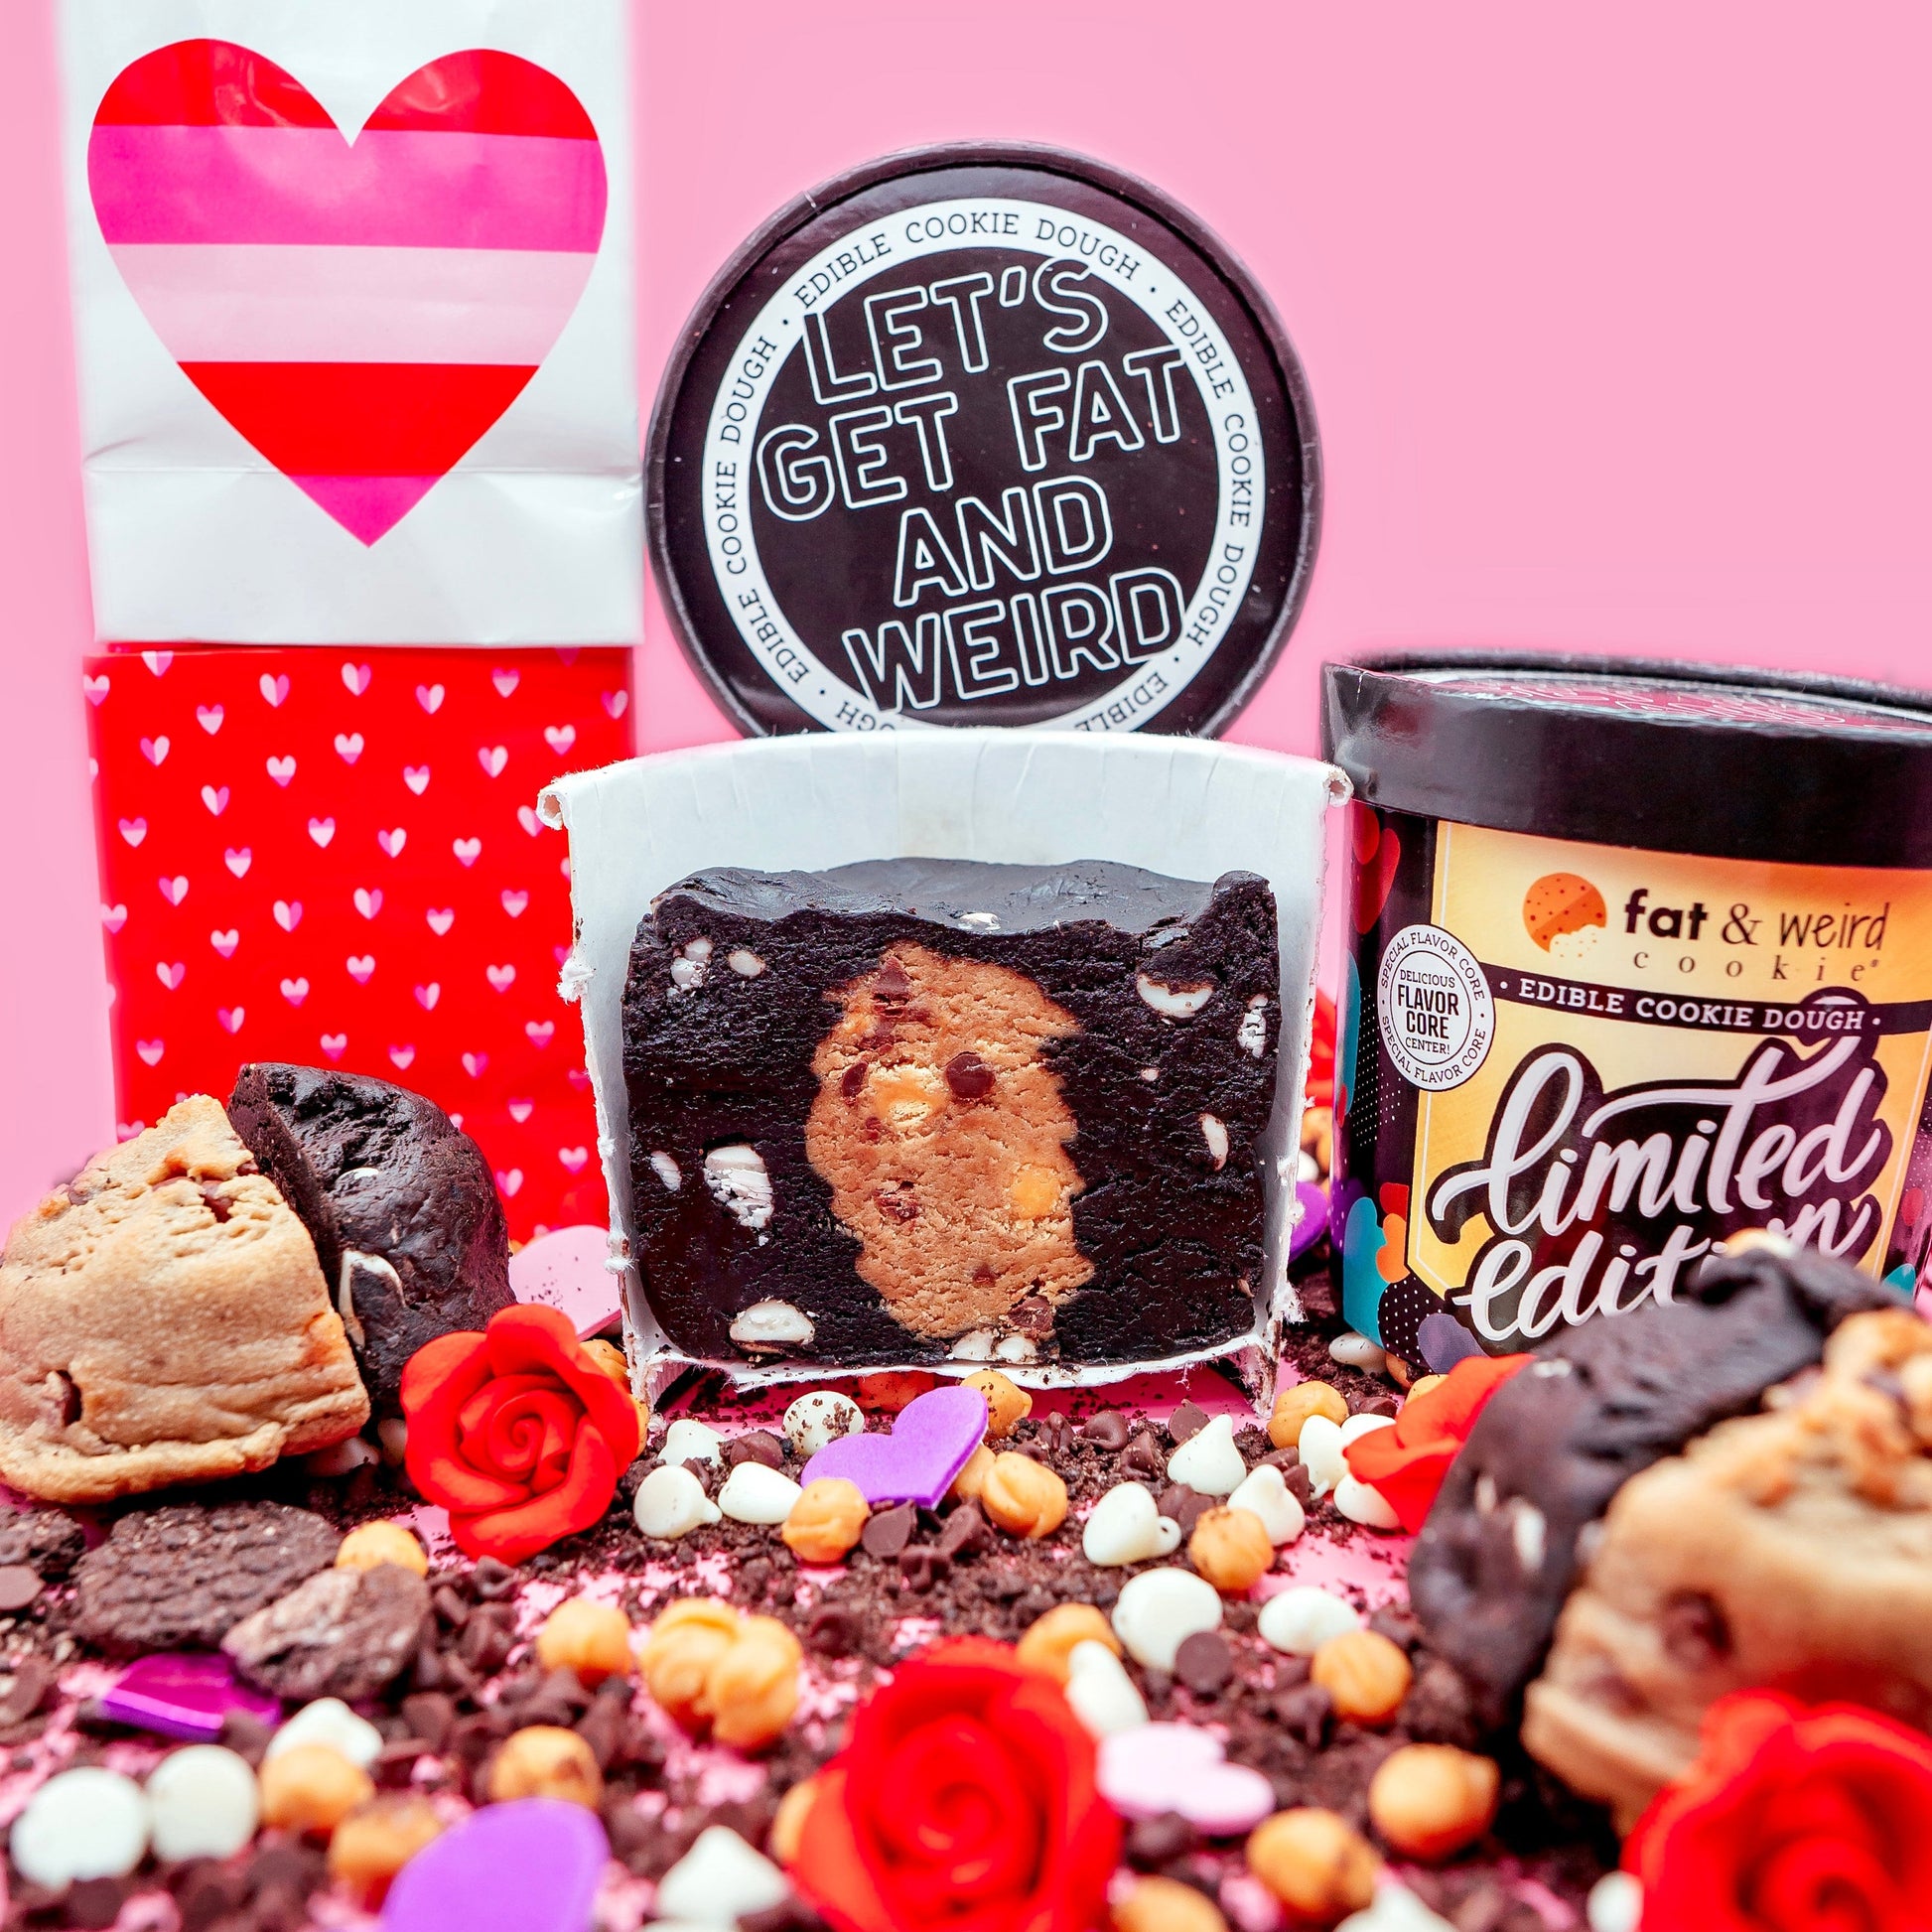 Limited Edition Edible Cookie Dough - V-Card Cookie Dough Fat & Weird Cookie 